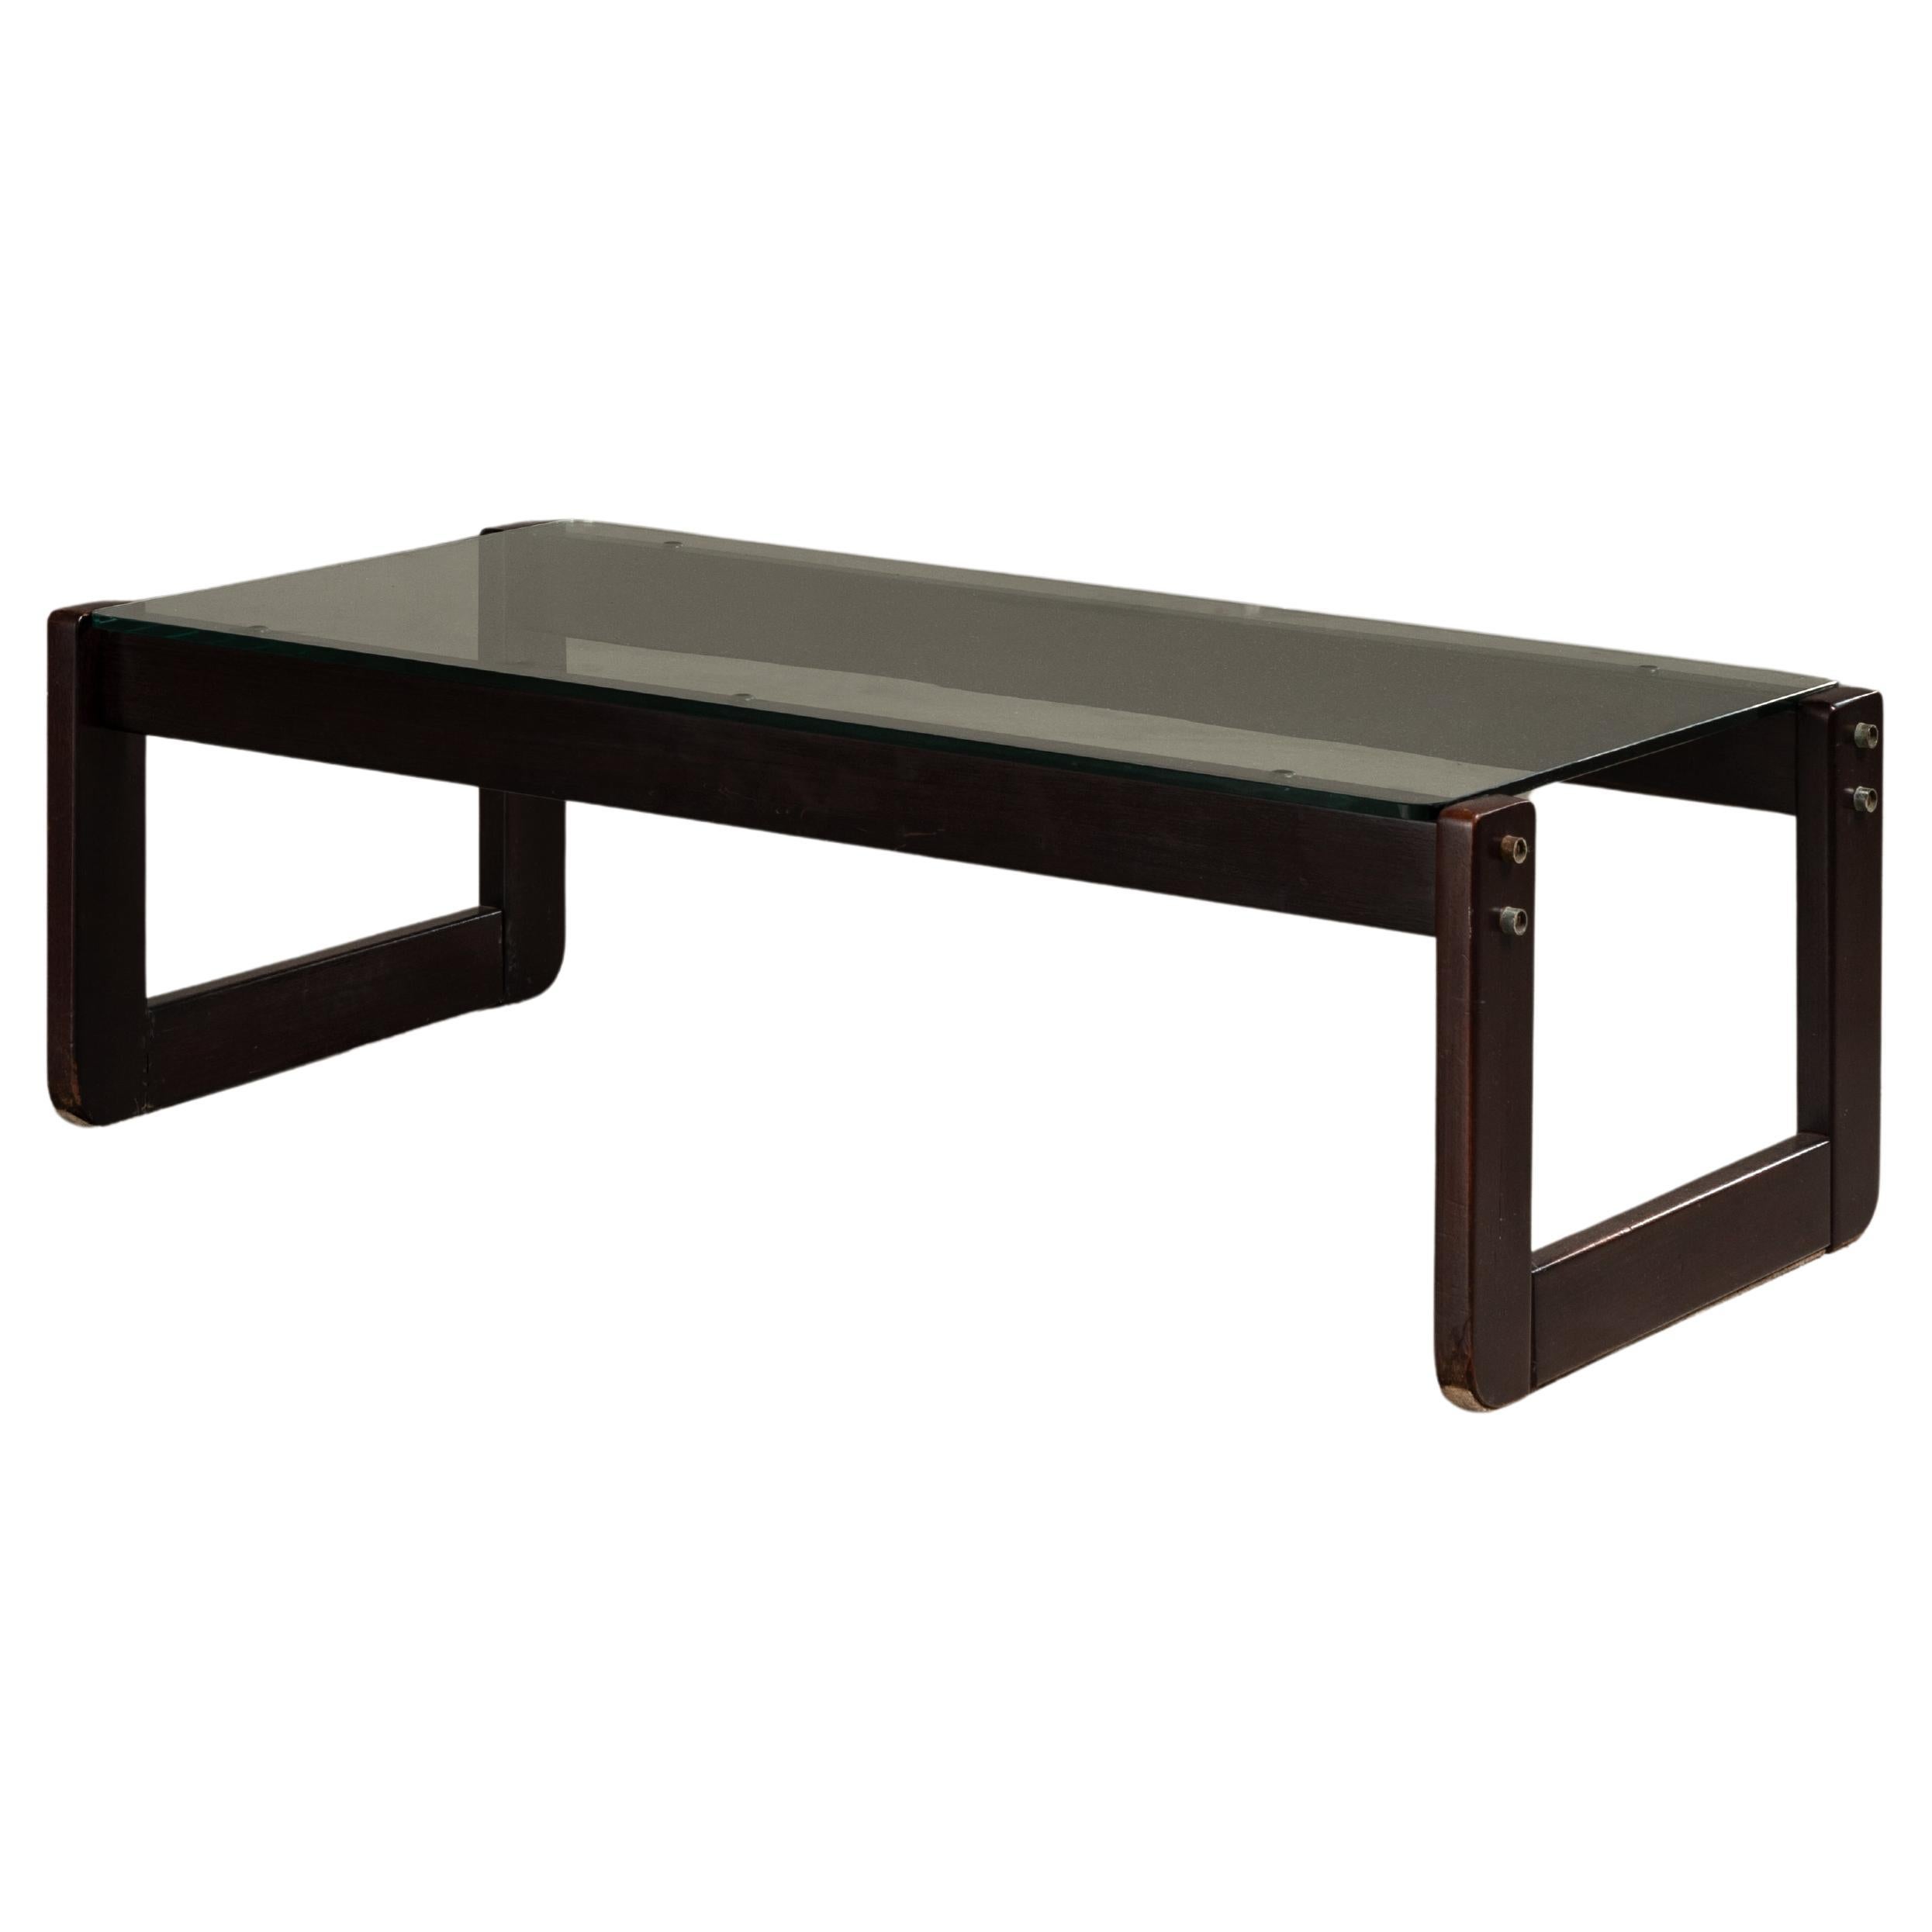 'MP-105' Coffee Table, by Percival Lafer, Brazilian Mid-Century Modern For Sale